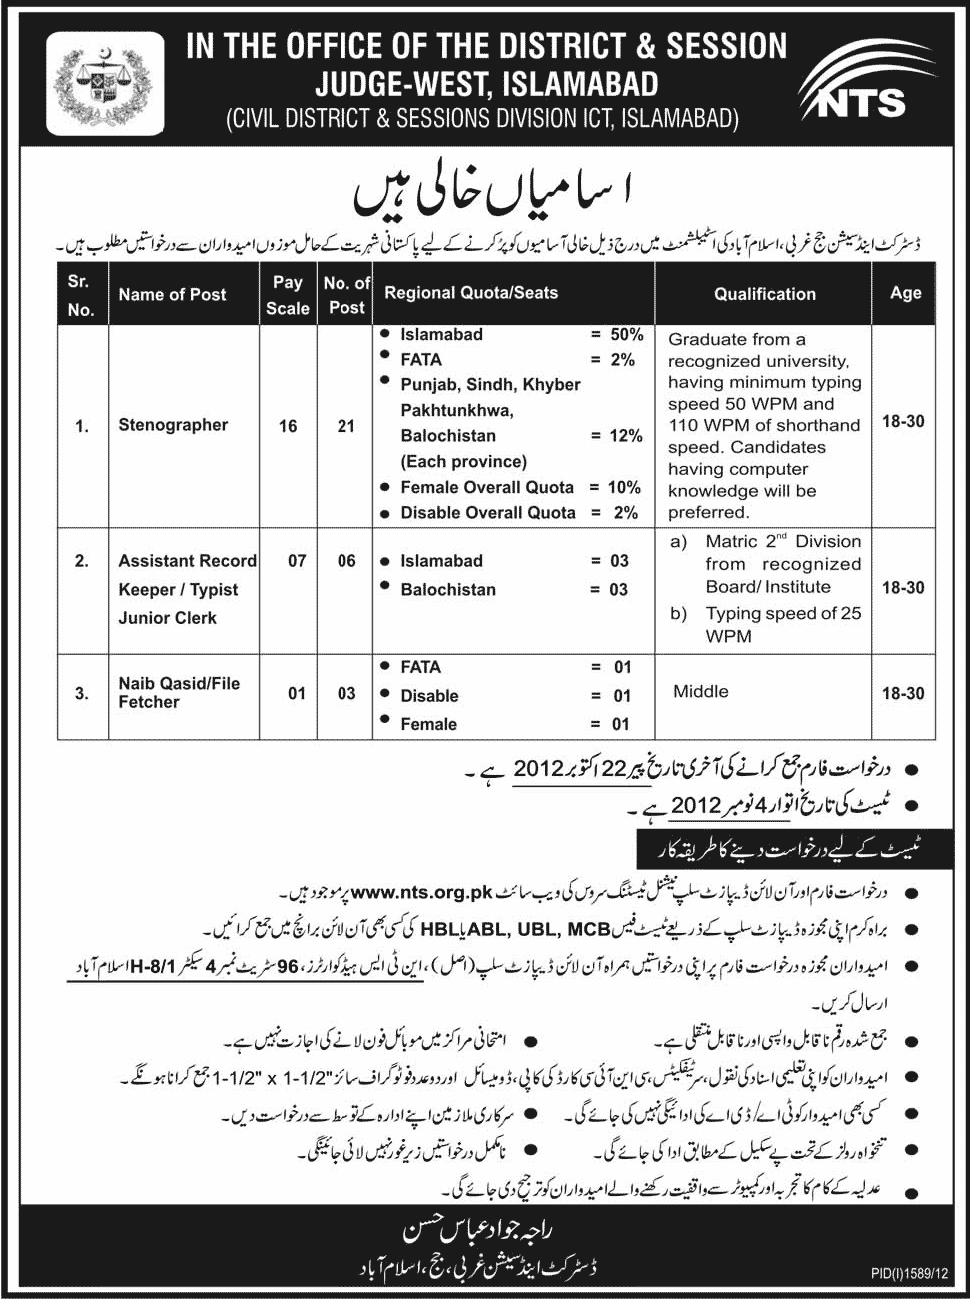 Office of The District & Session Judge - West, Islamabad Requires Office Staff